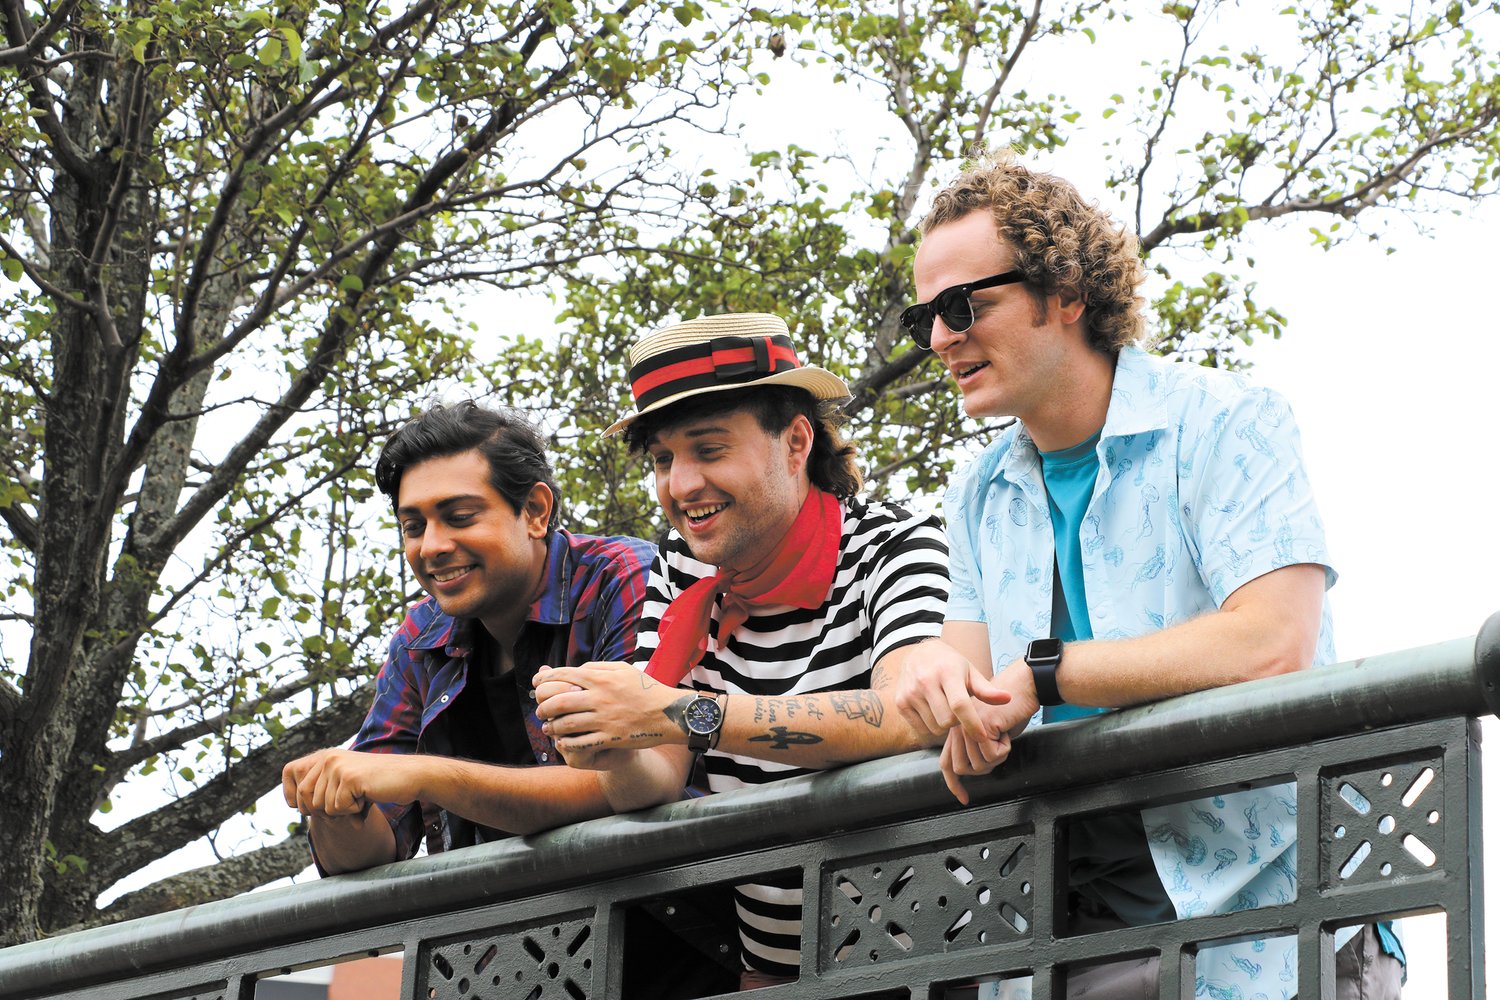 ADVENTURES IN ITALY: Paul and friends (Jason and Clyde) enjoy the view of Italy on their vacation around the world. This is the calm before the storm. From left: Abhi Sinha, Adam Carbone and Nick Pasqual.